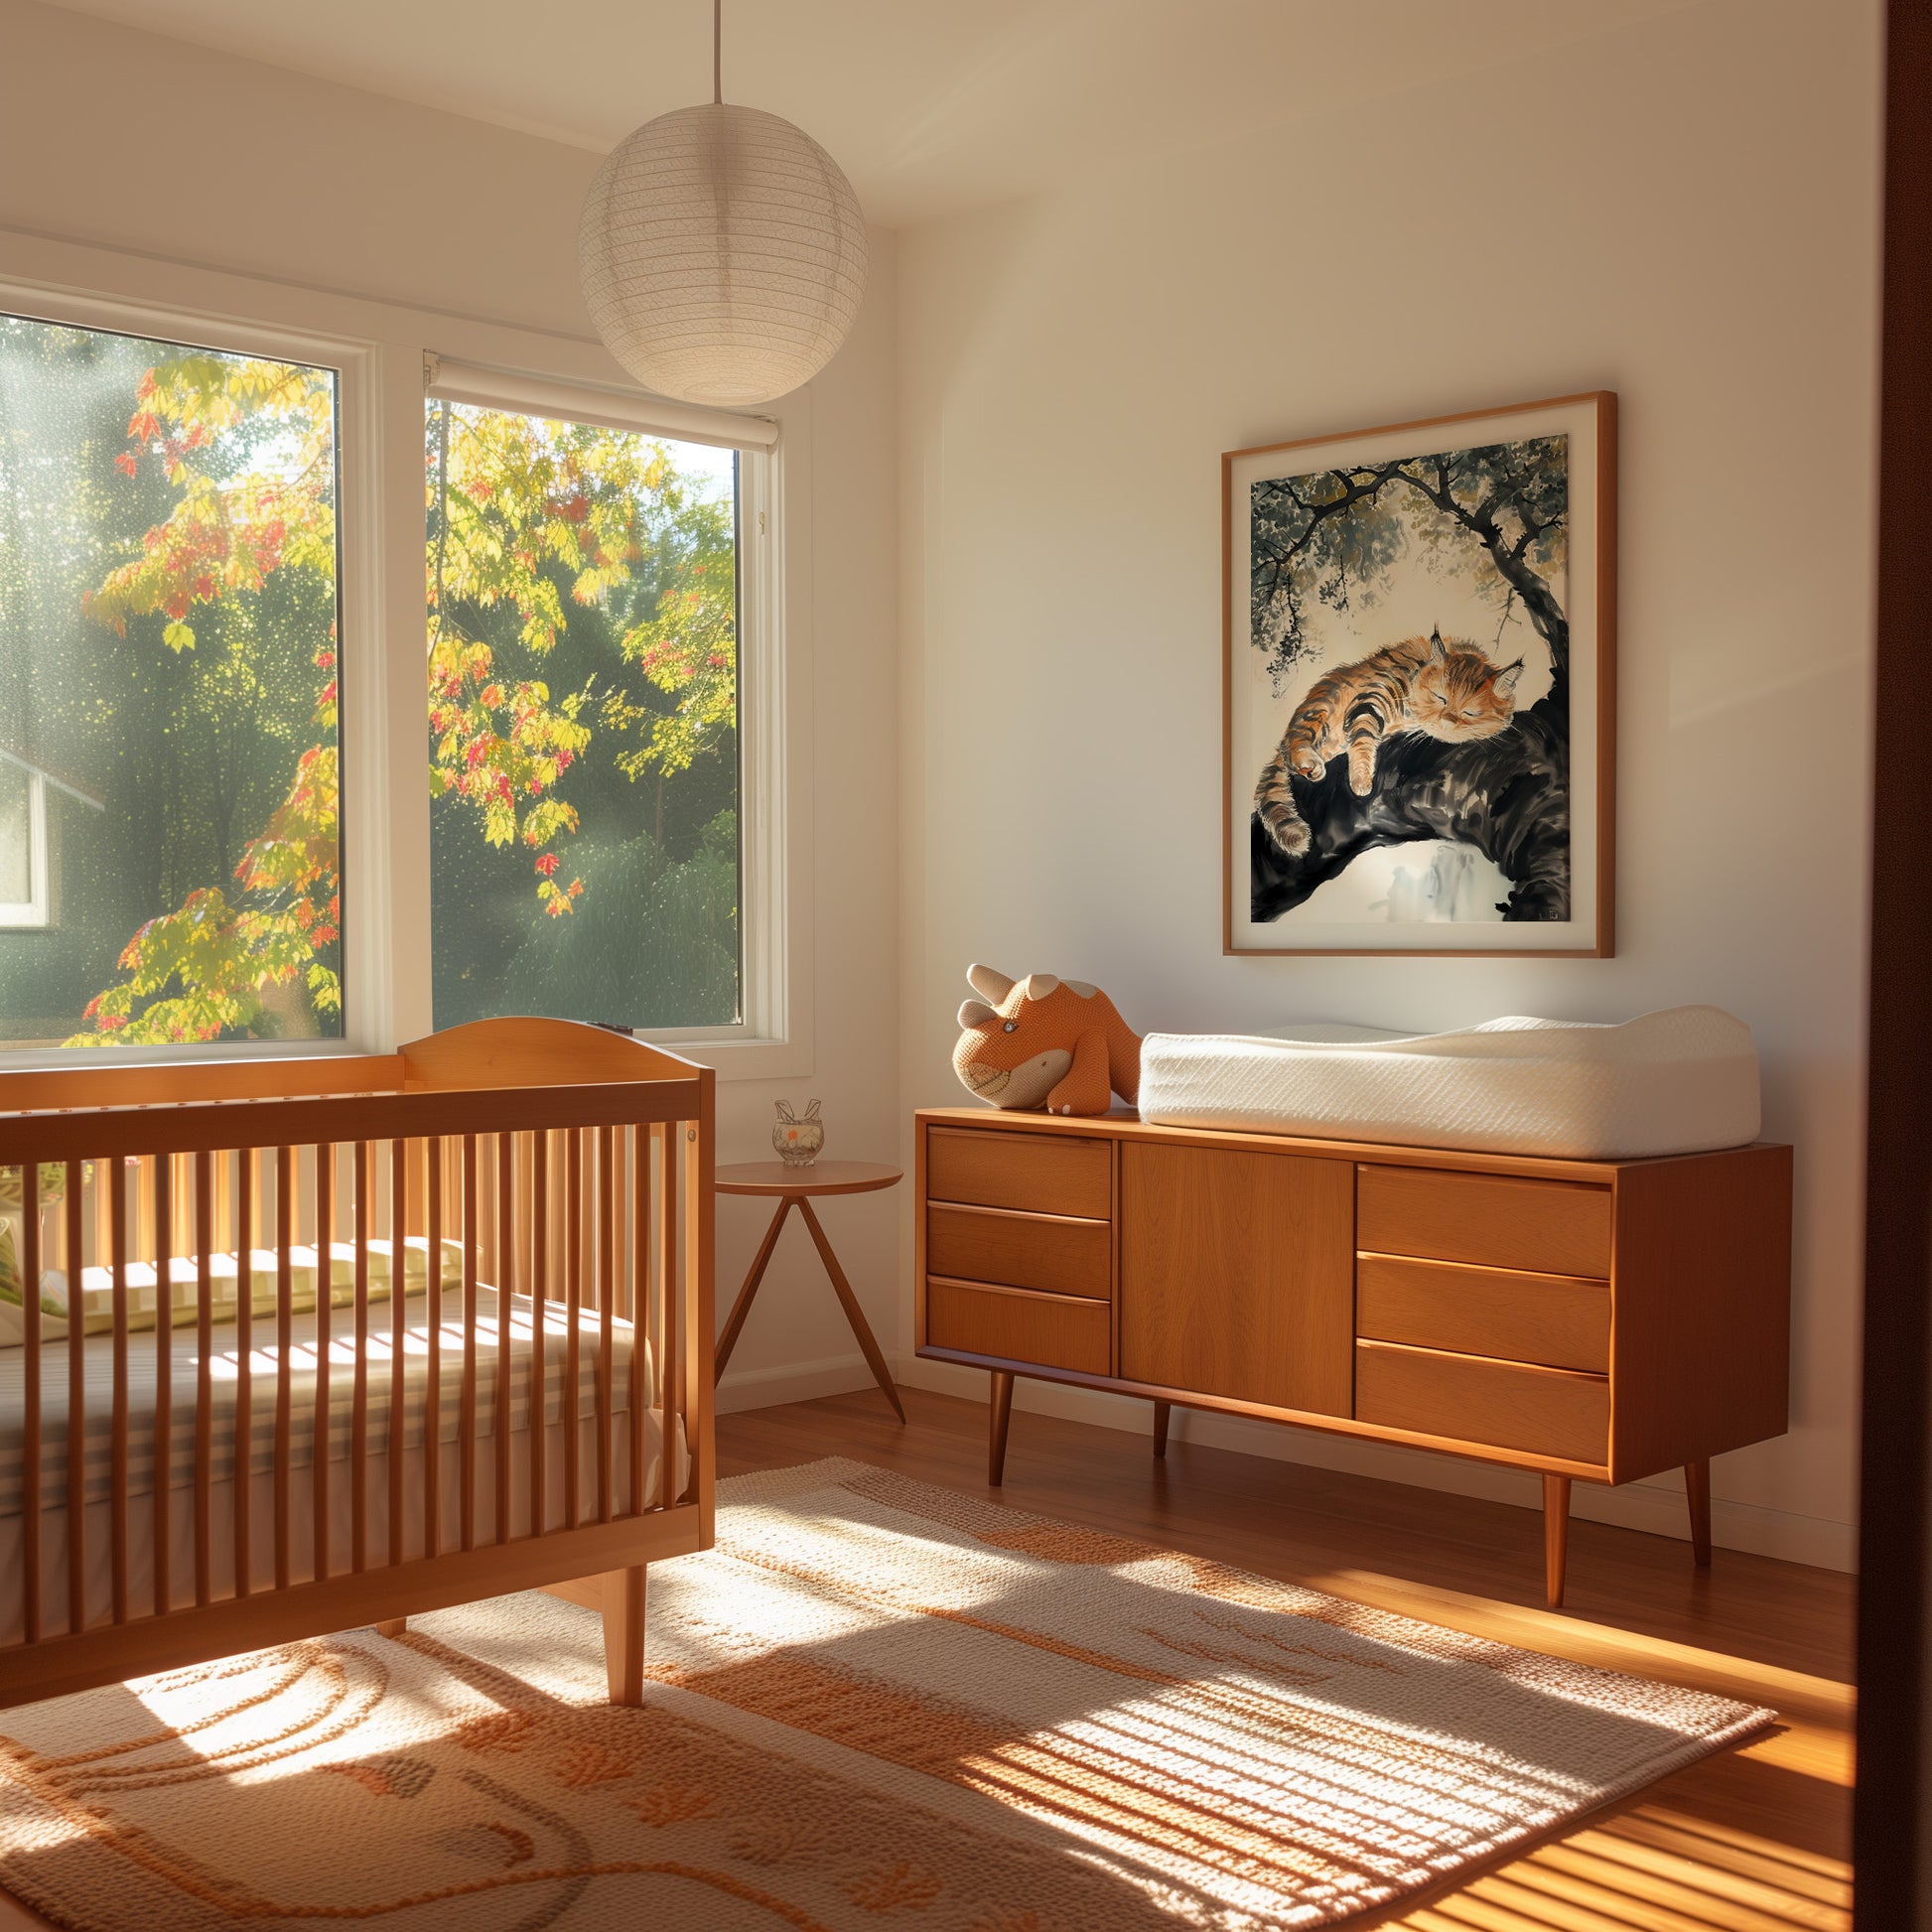 A cozy nursery room with a crib, dresser, and a painting of tigers, bathed in warm sunlight.